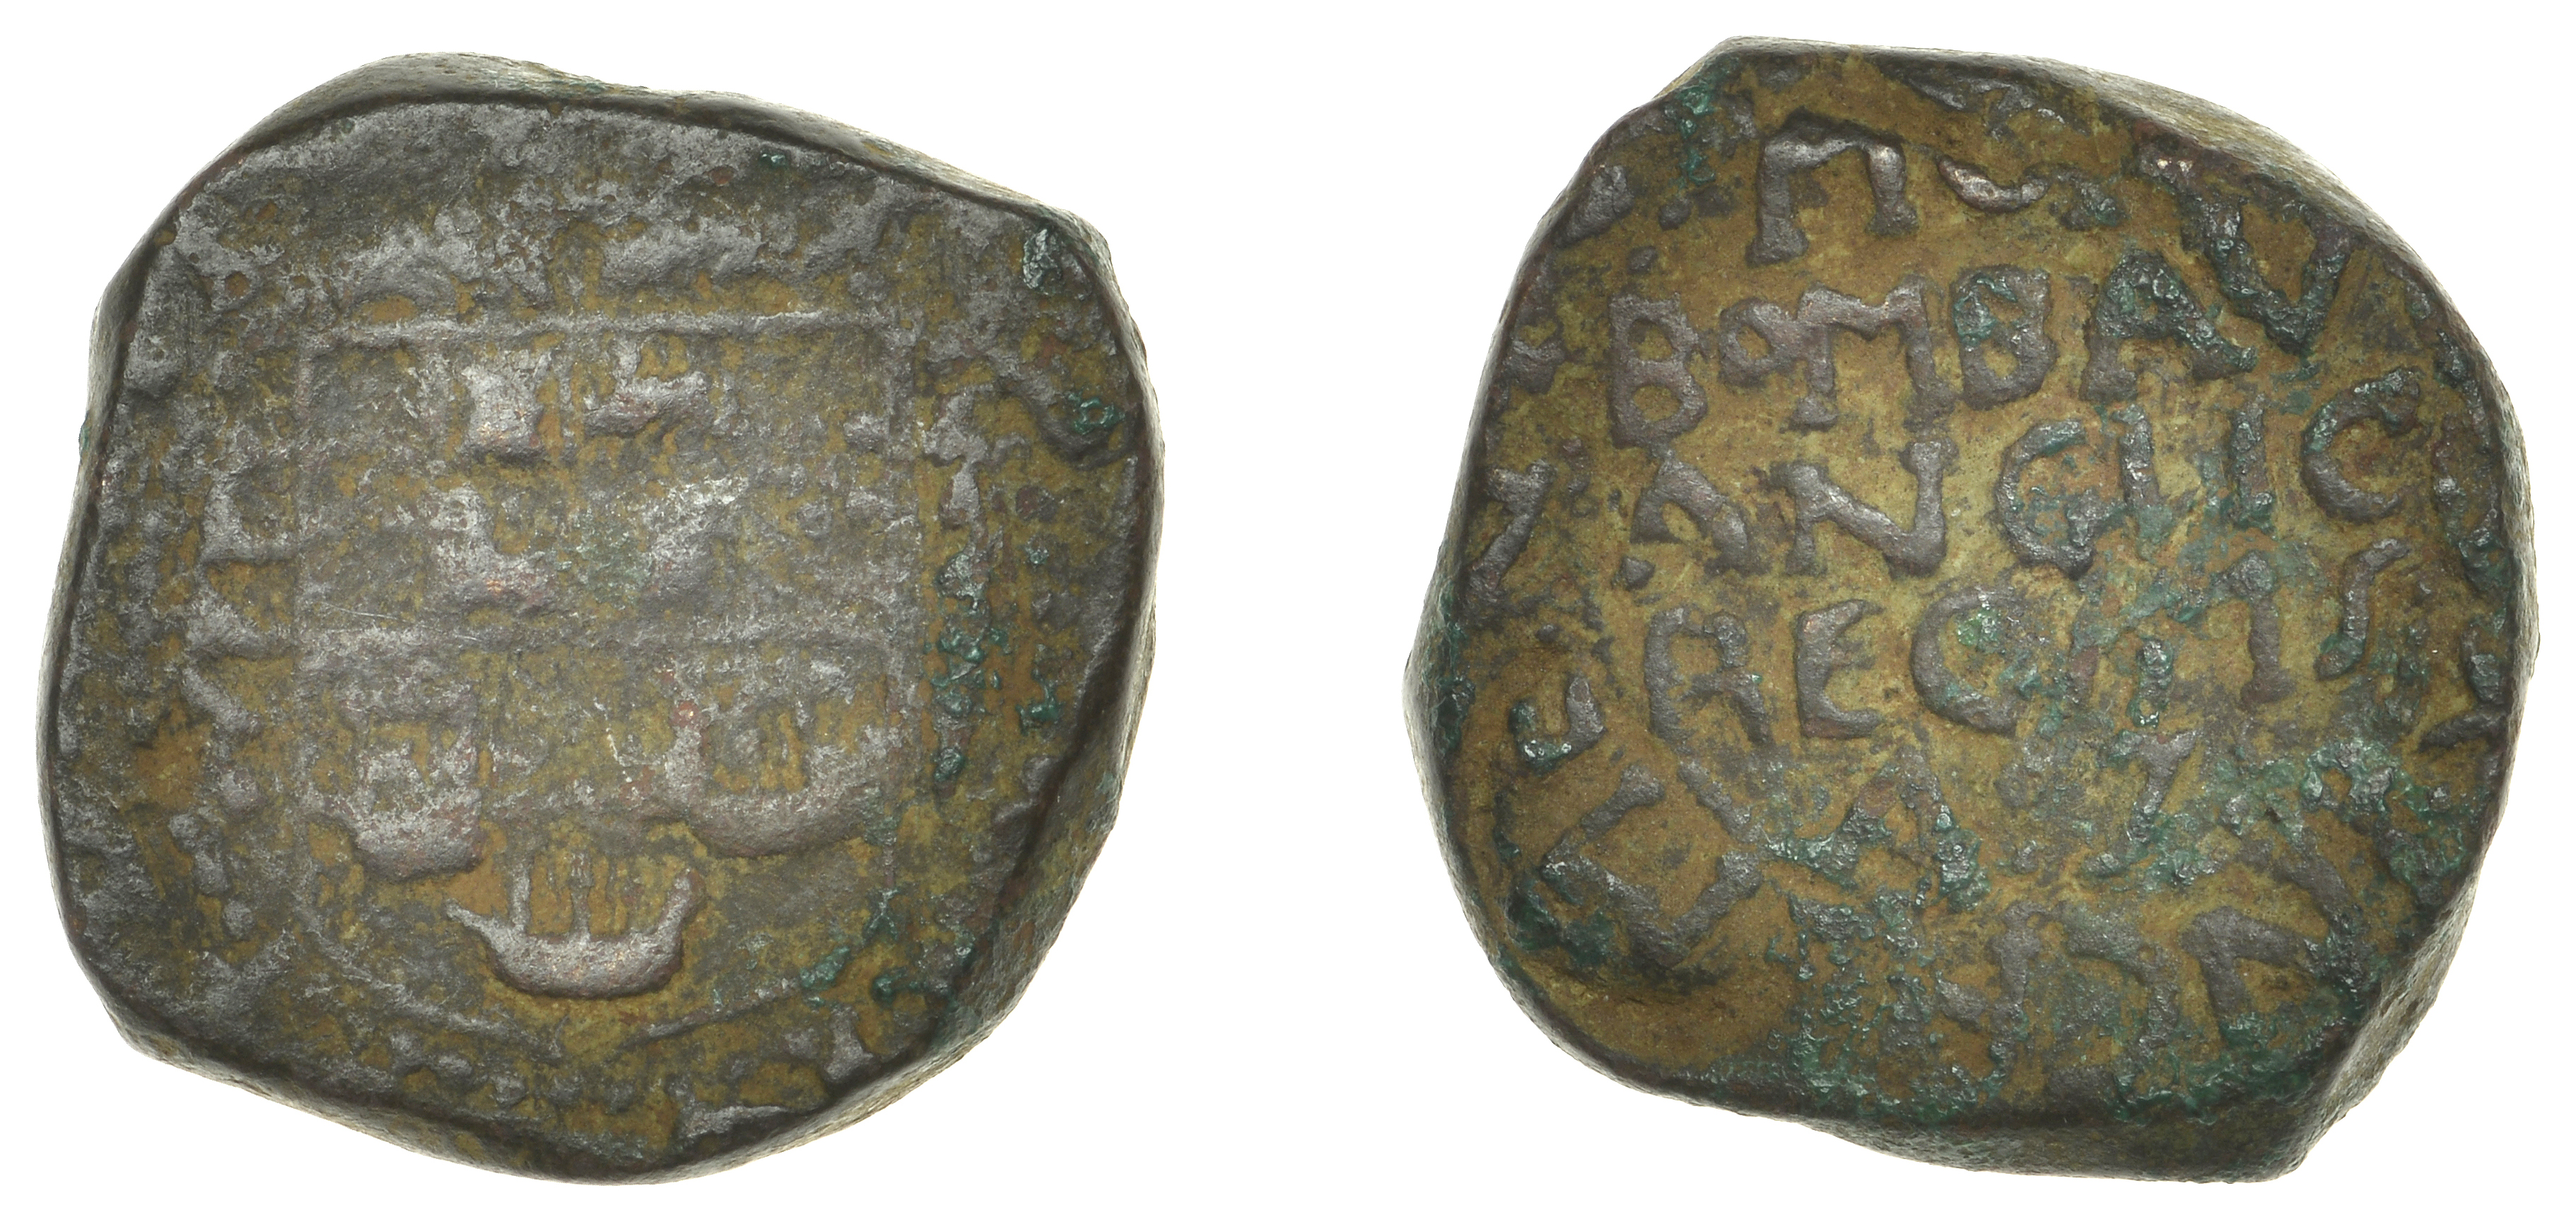 East India Company, Bombay Presidency, Early coinages: English design, copper Copperoon, typ...